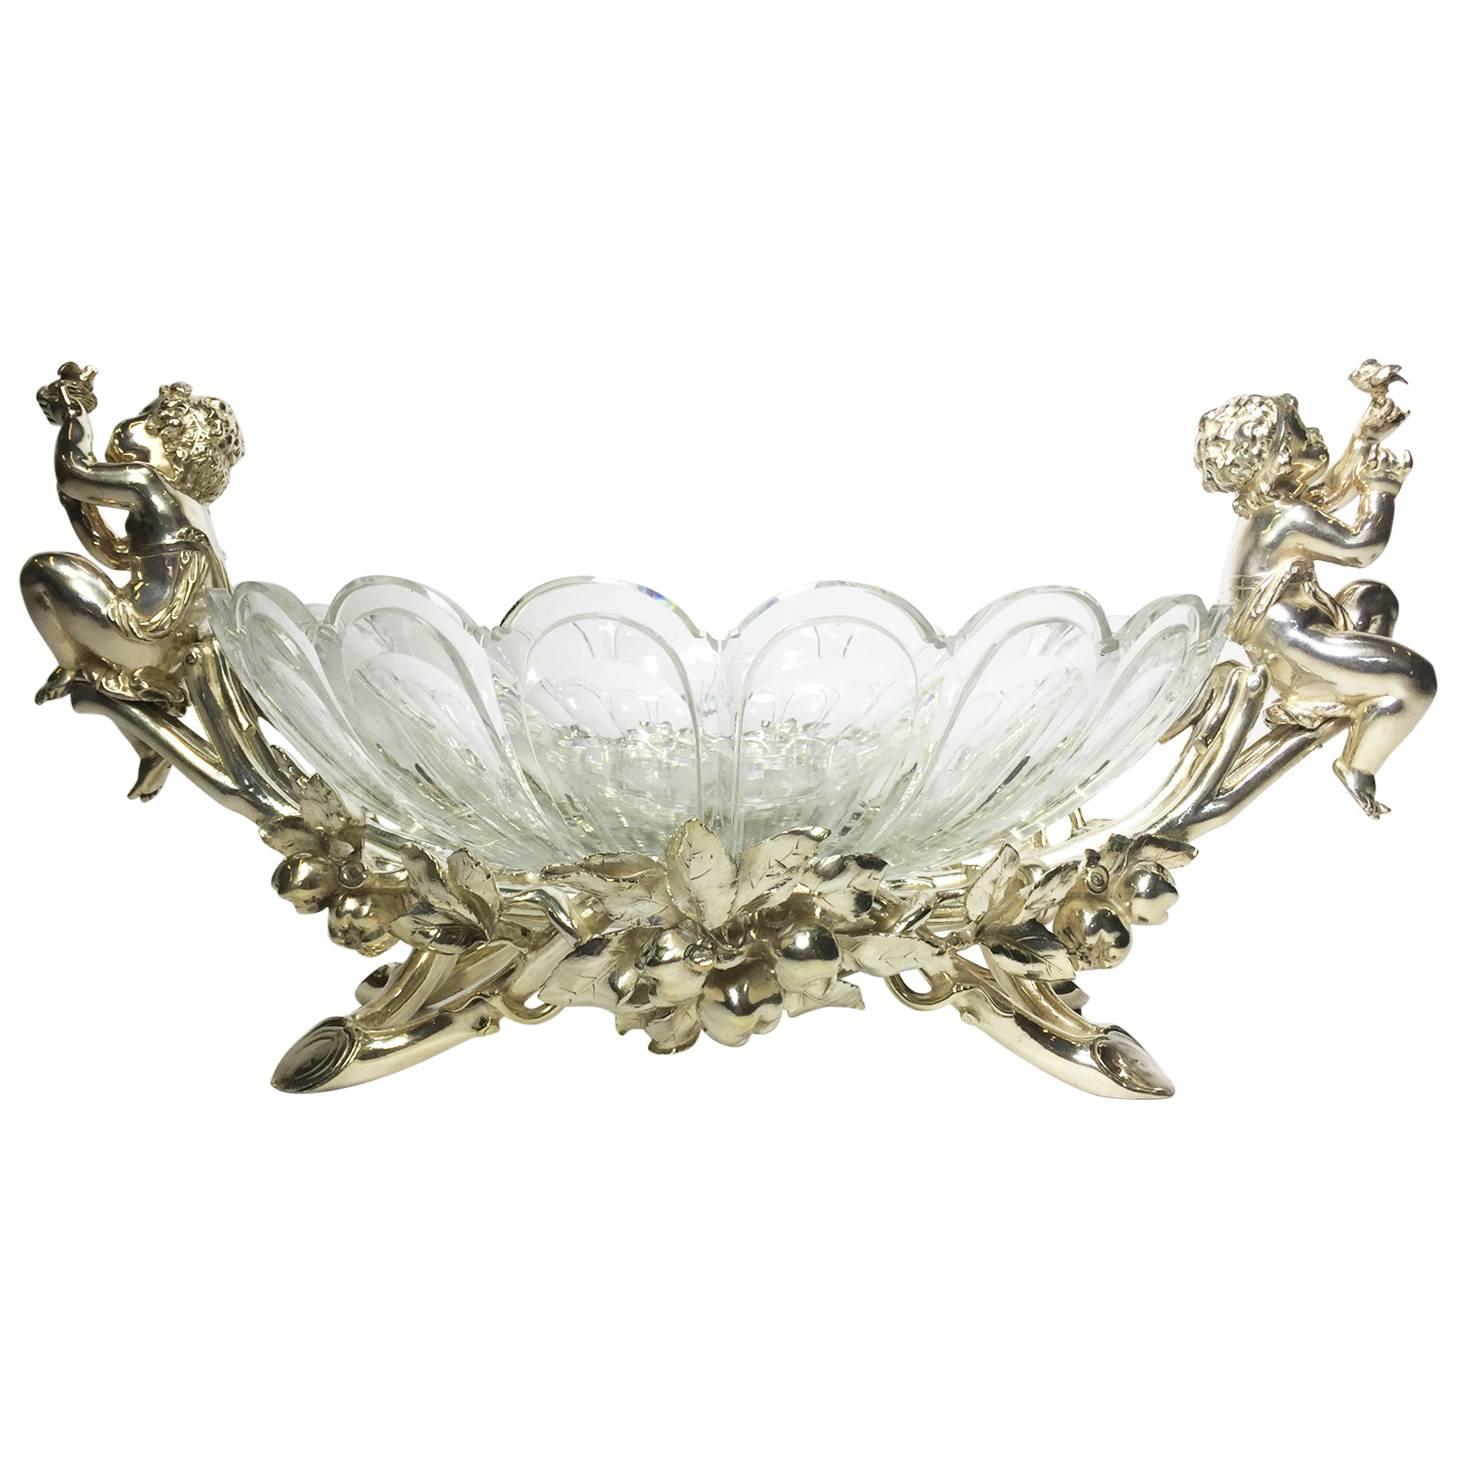 French 19th-20th Century Louis XV Style Silvered Christofle & Cie Centerpiece